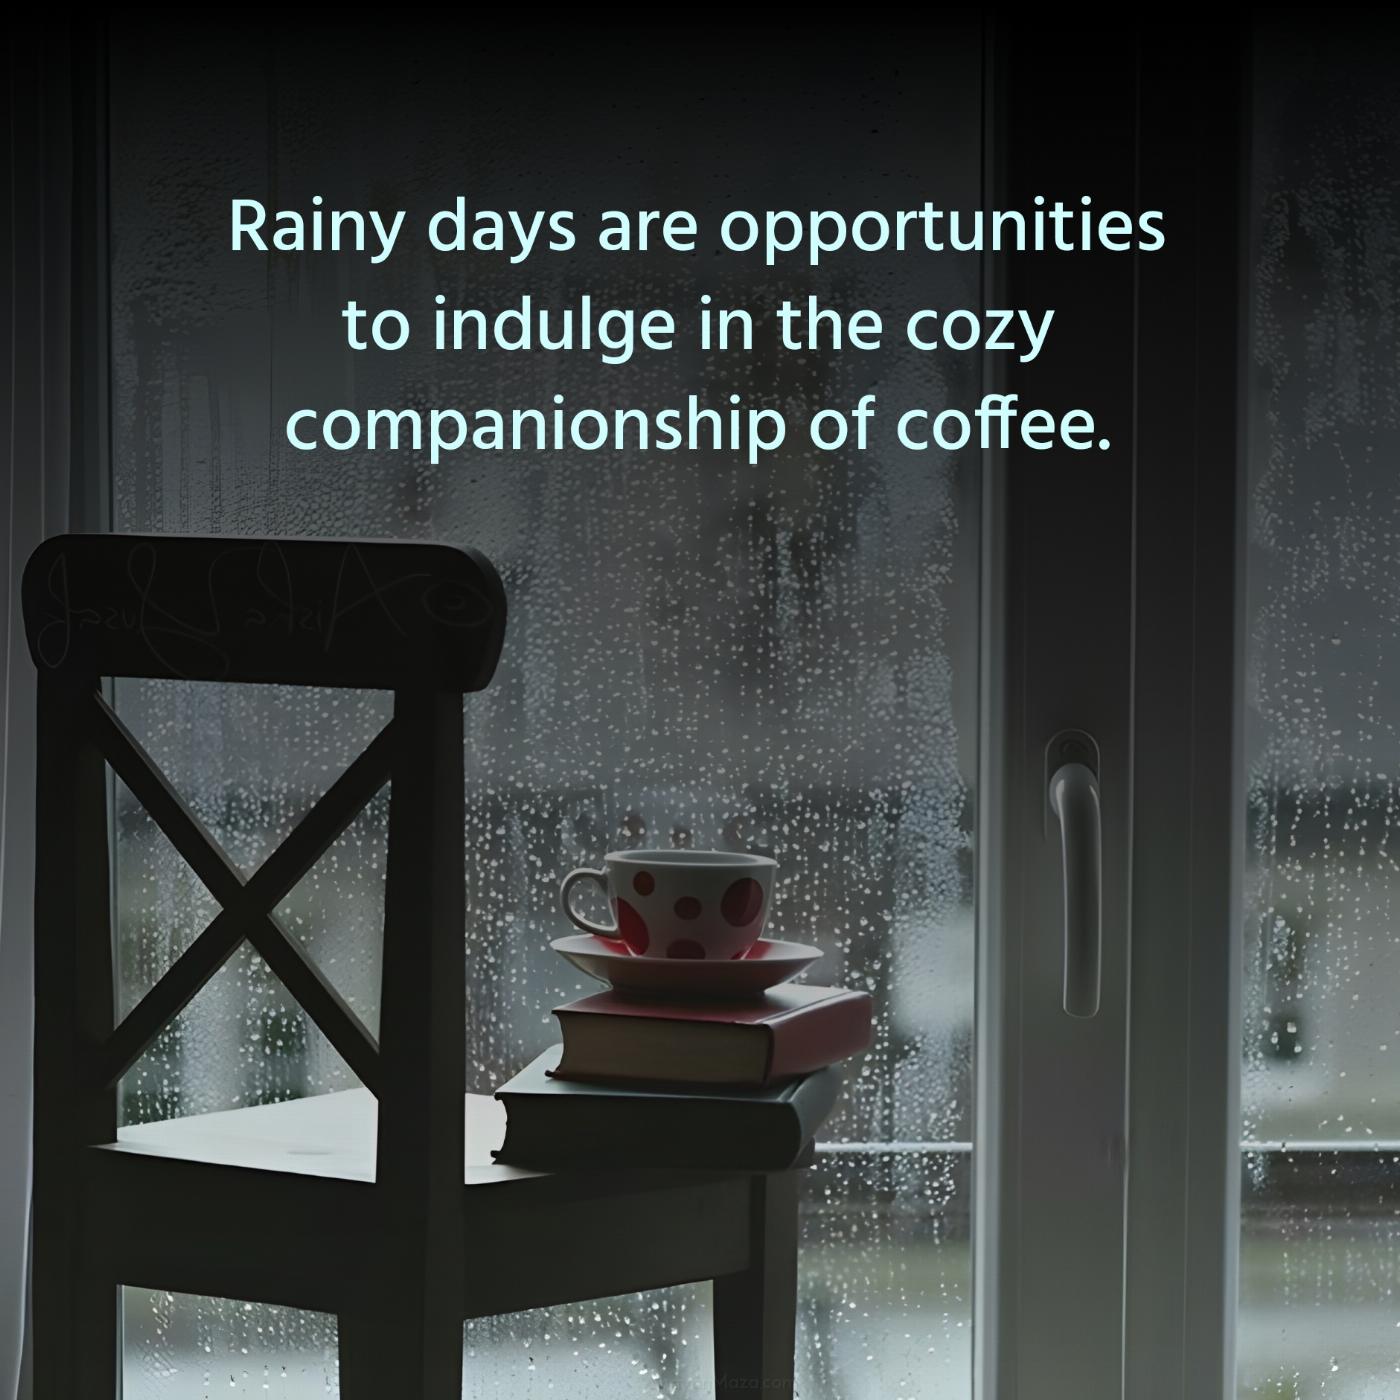 Rainy days are opportunities to indulge in the cozy companionship of coffee